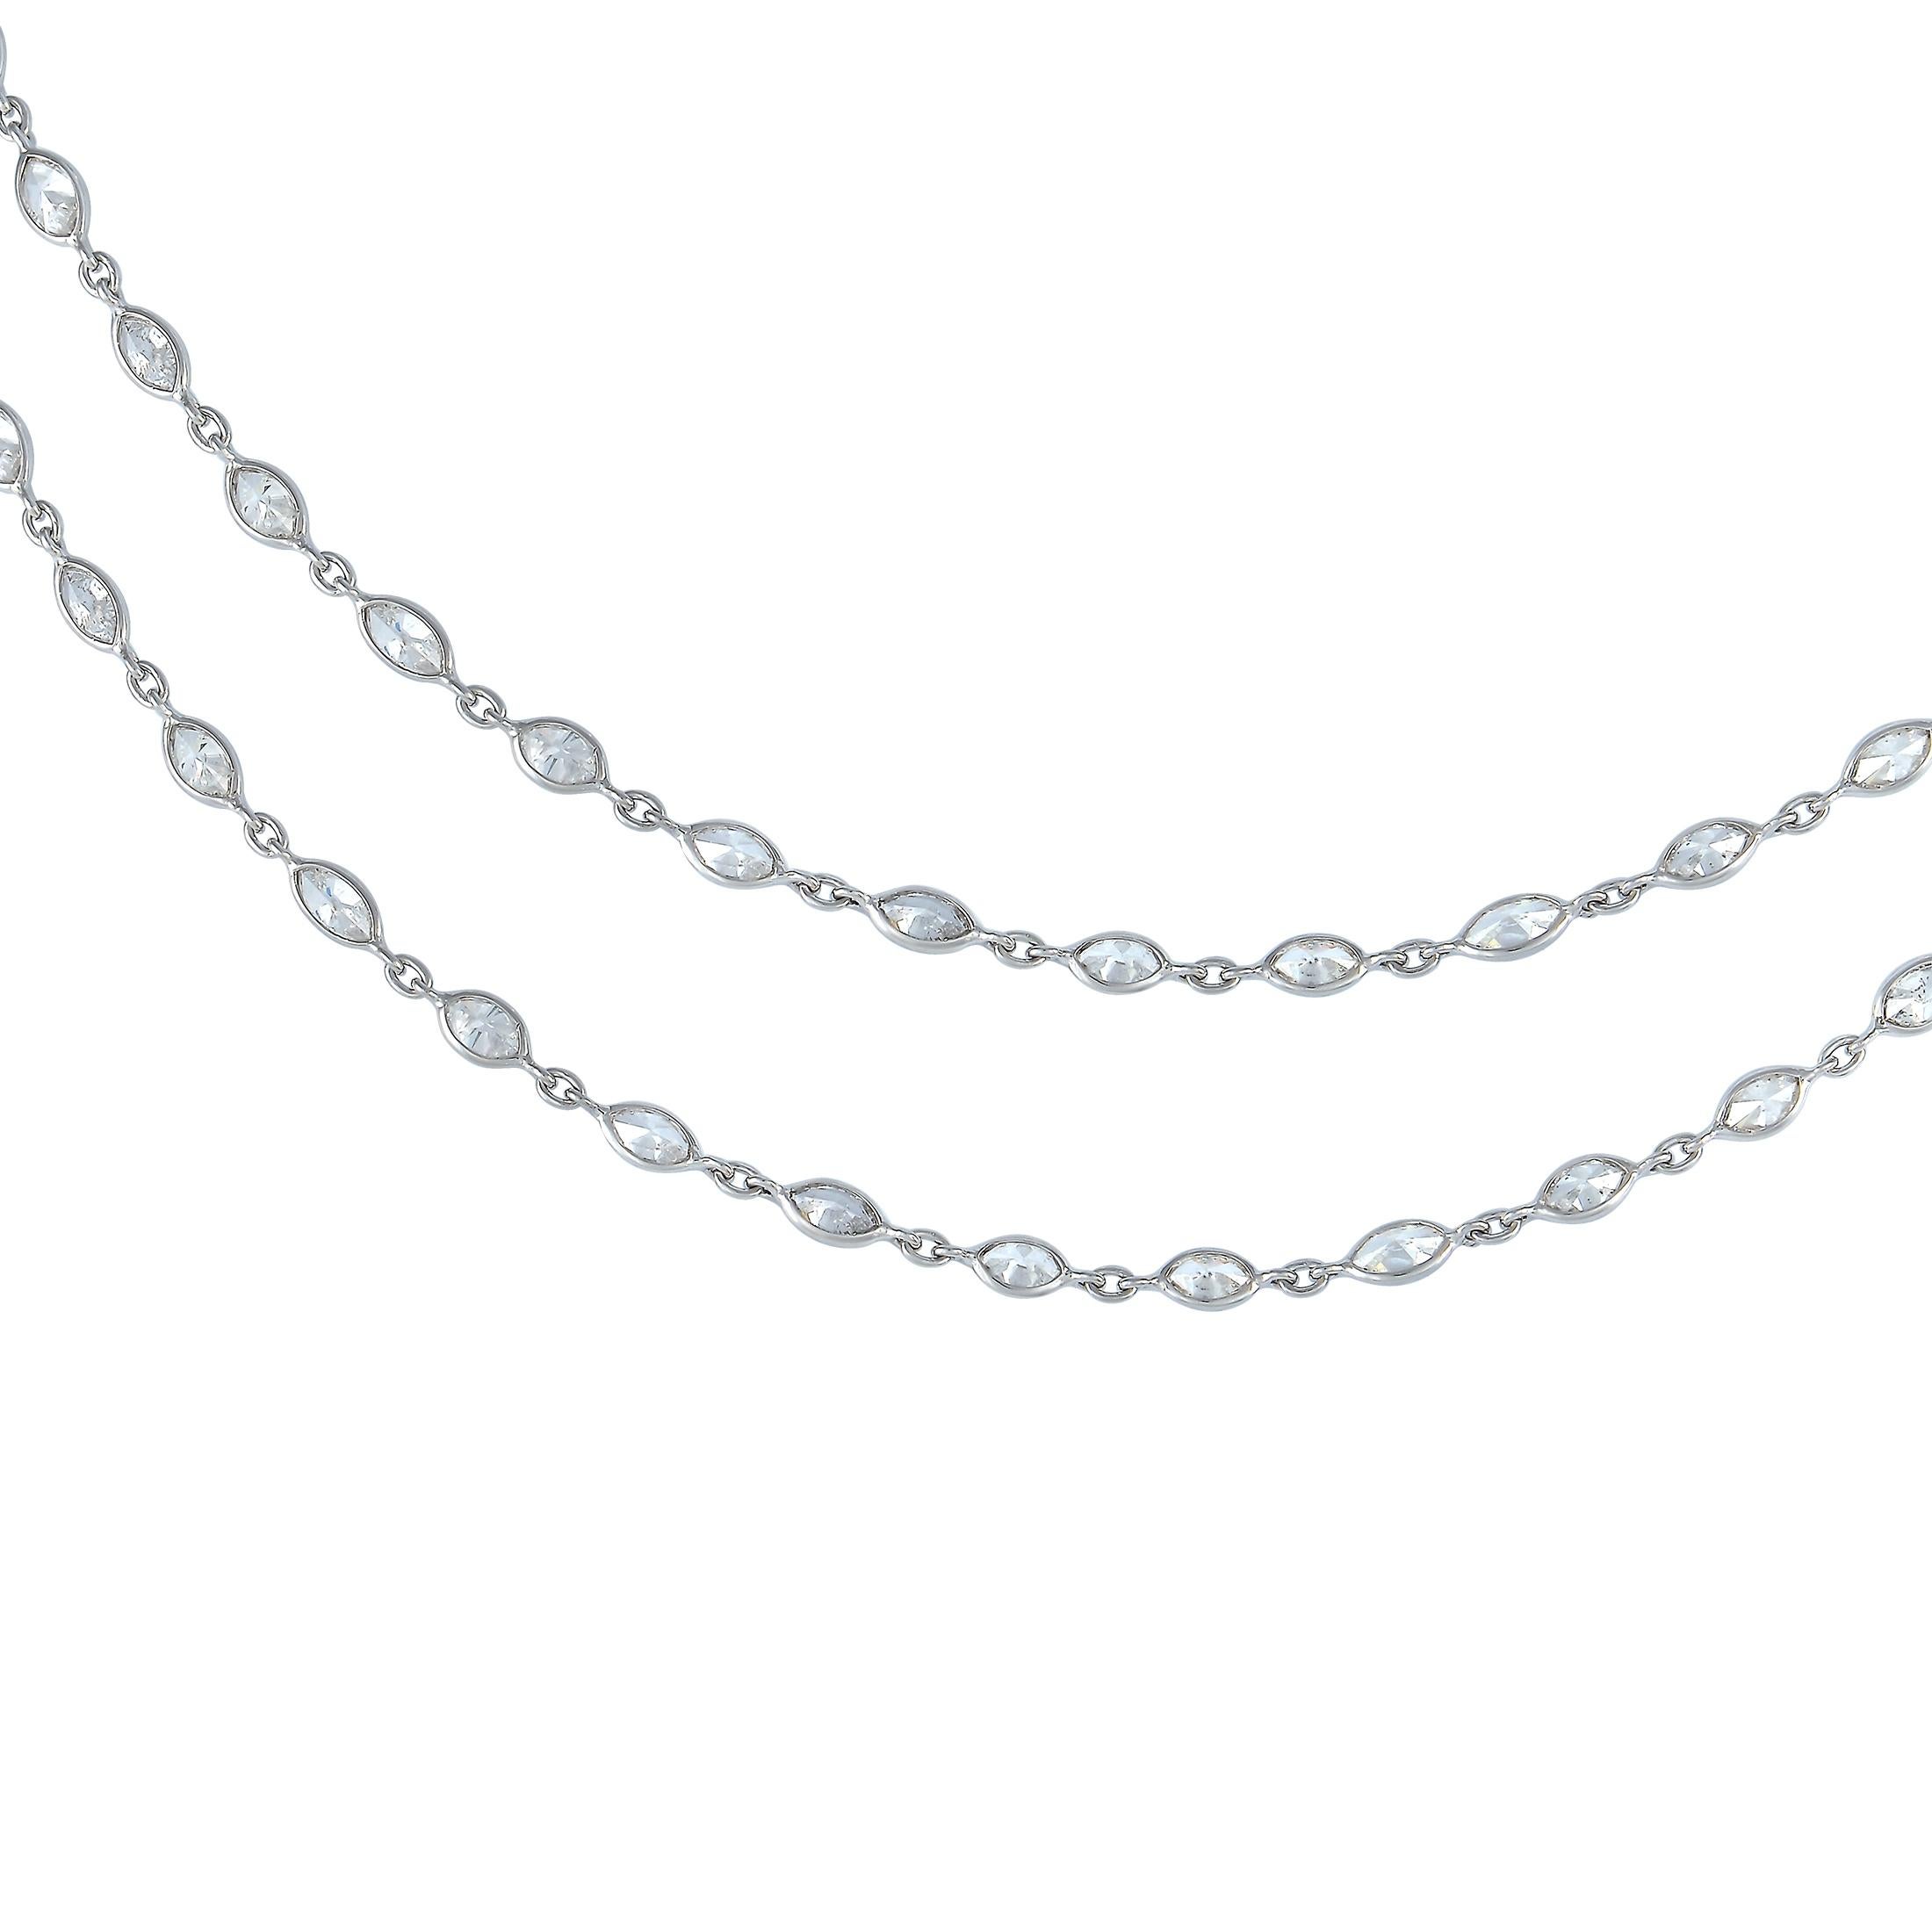 This necklace is a captivating piece that will complement any aesthetic. A stunning platinum chain measuring 26” long comes to life thanks to breathtaking diamond accents totaling 9.60 carats. Wear it long or create a double-layered look - either